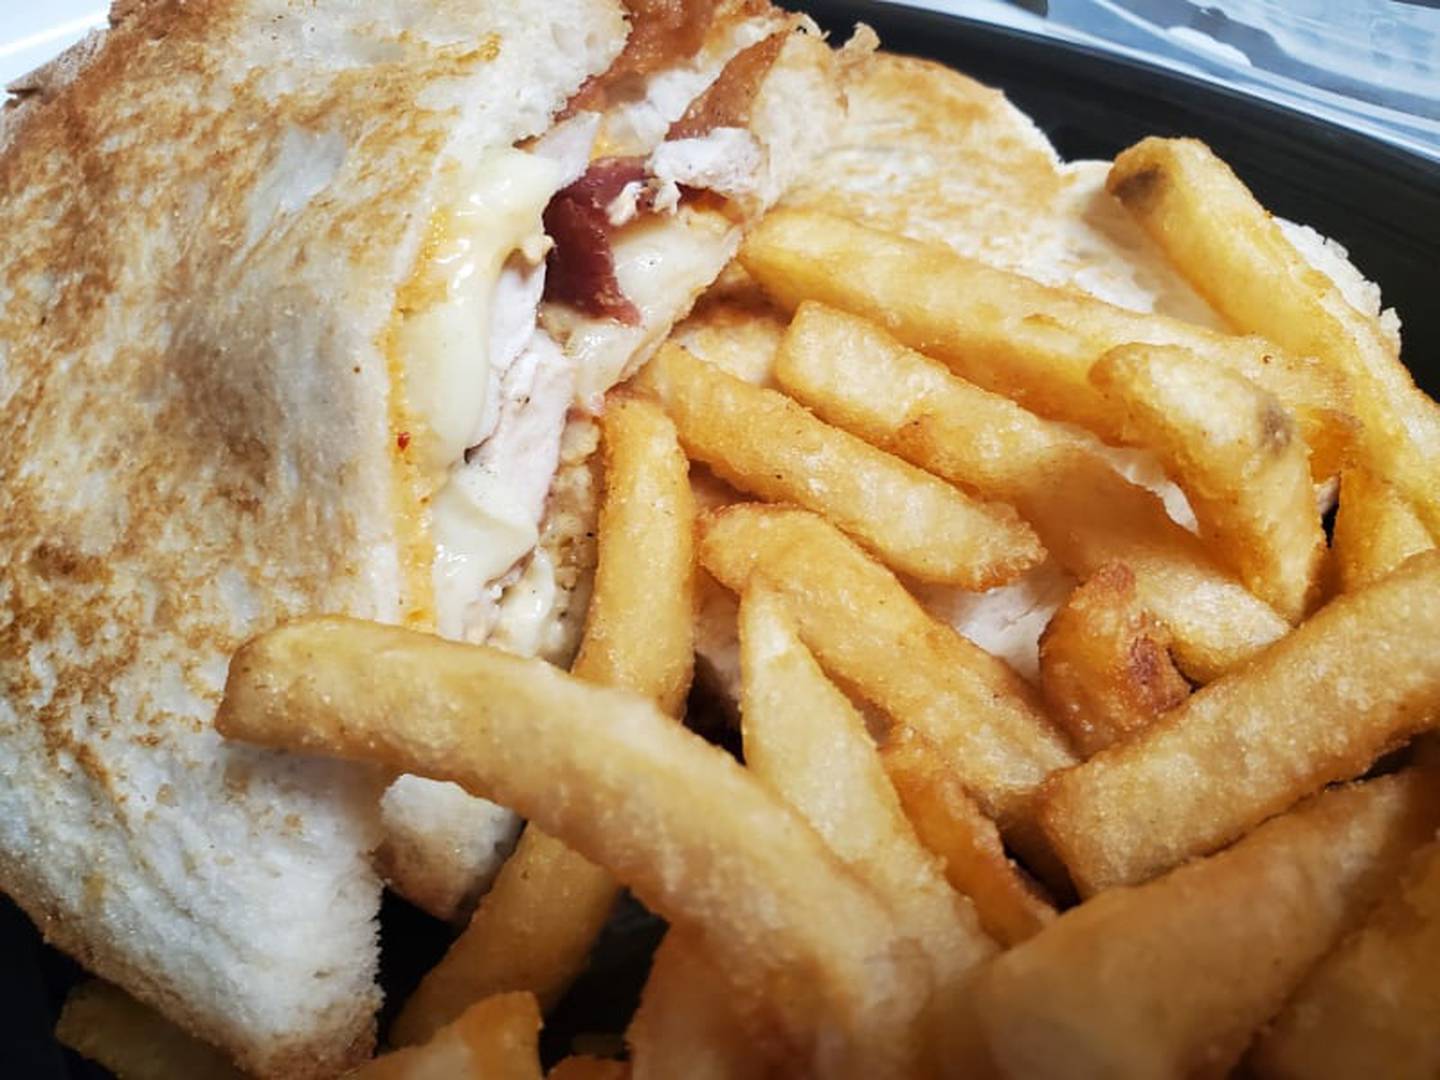 This is a chicken bacon panini with cheddar cheese and chipotle mayo from Jameson's Pub in Joliet. The menu said it's a " succulent chicken breast with applewood smoked bacon, Swiss
cheese and chipotle mayo."